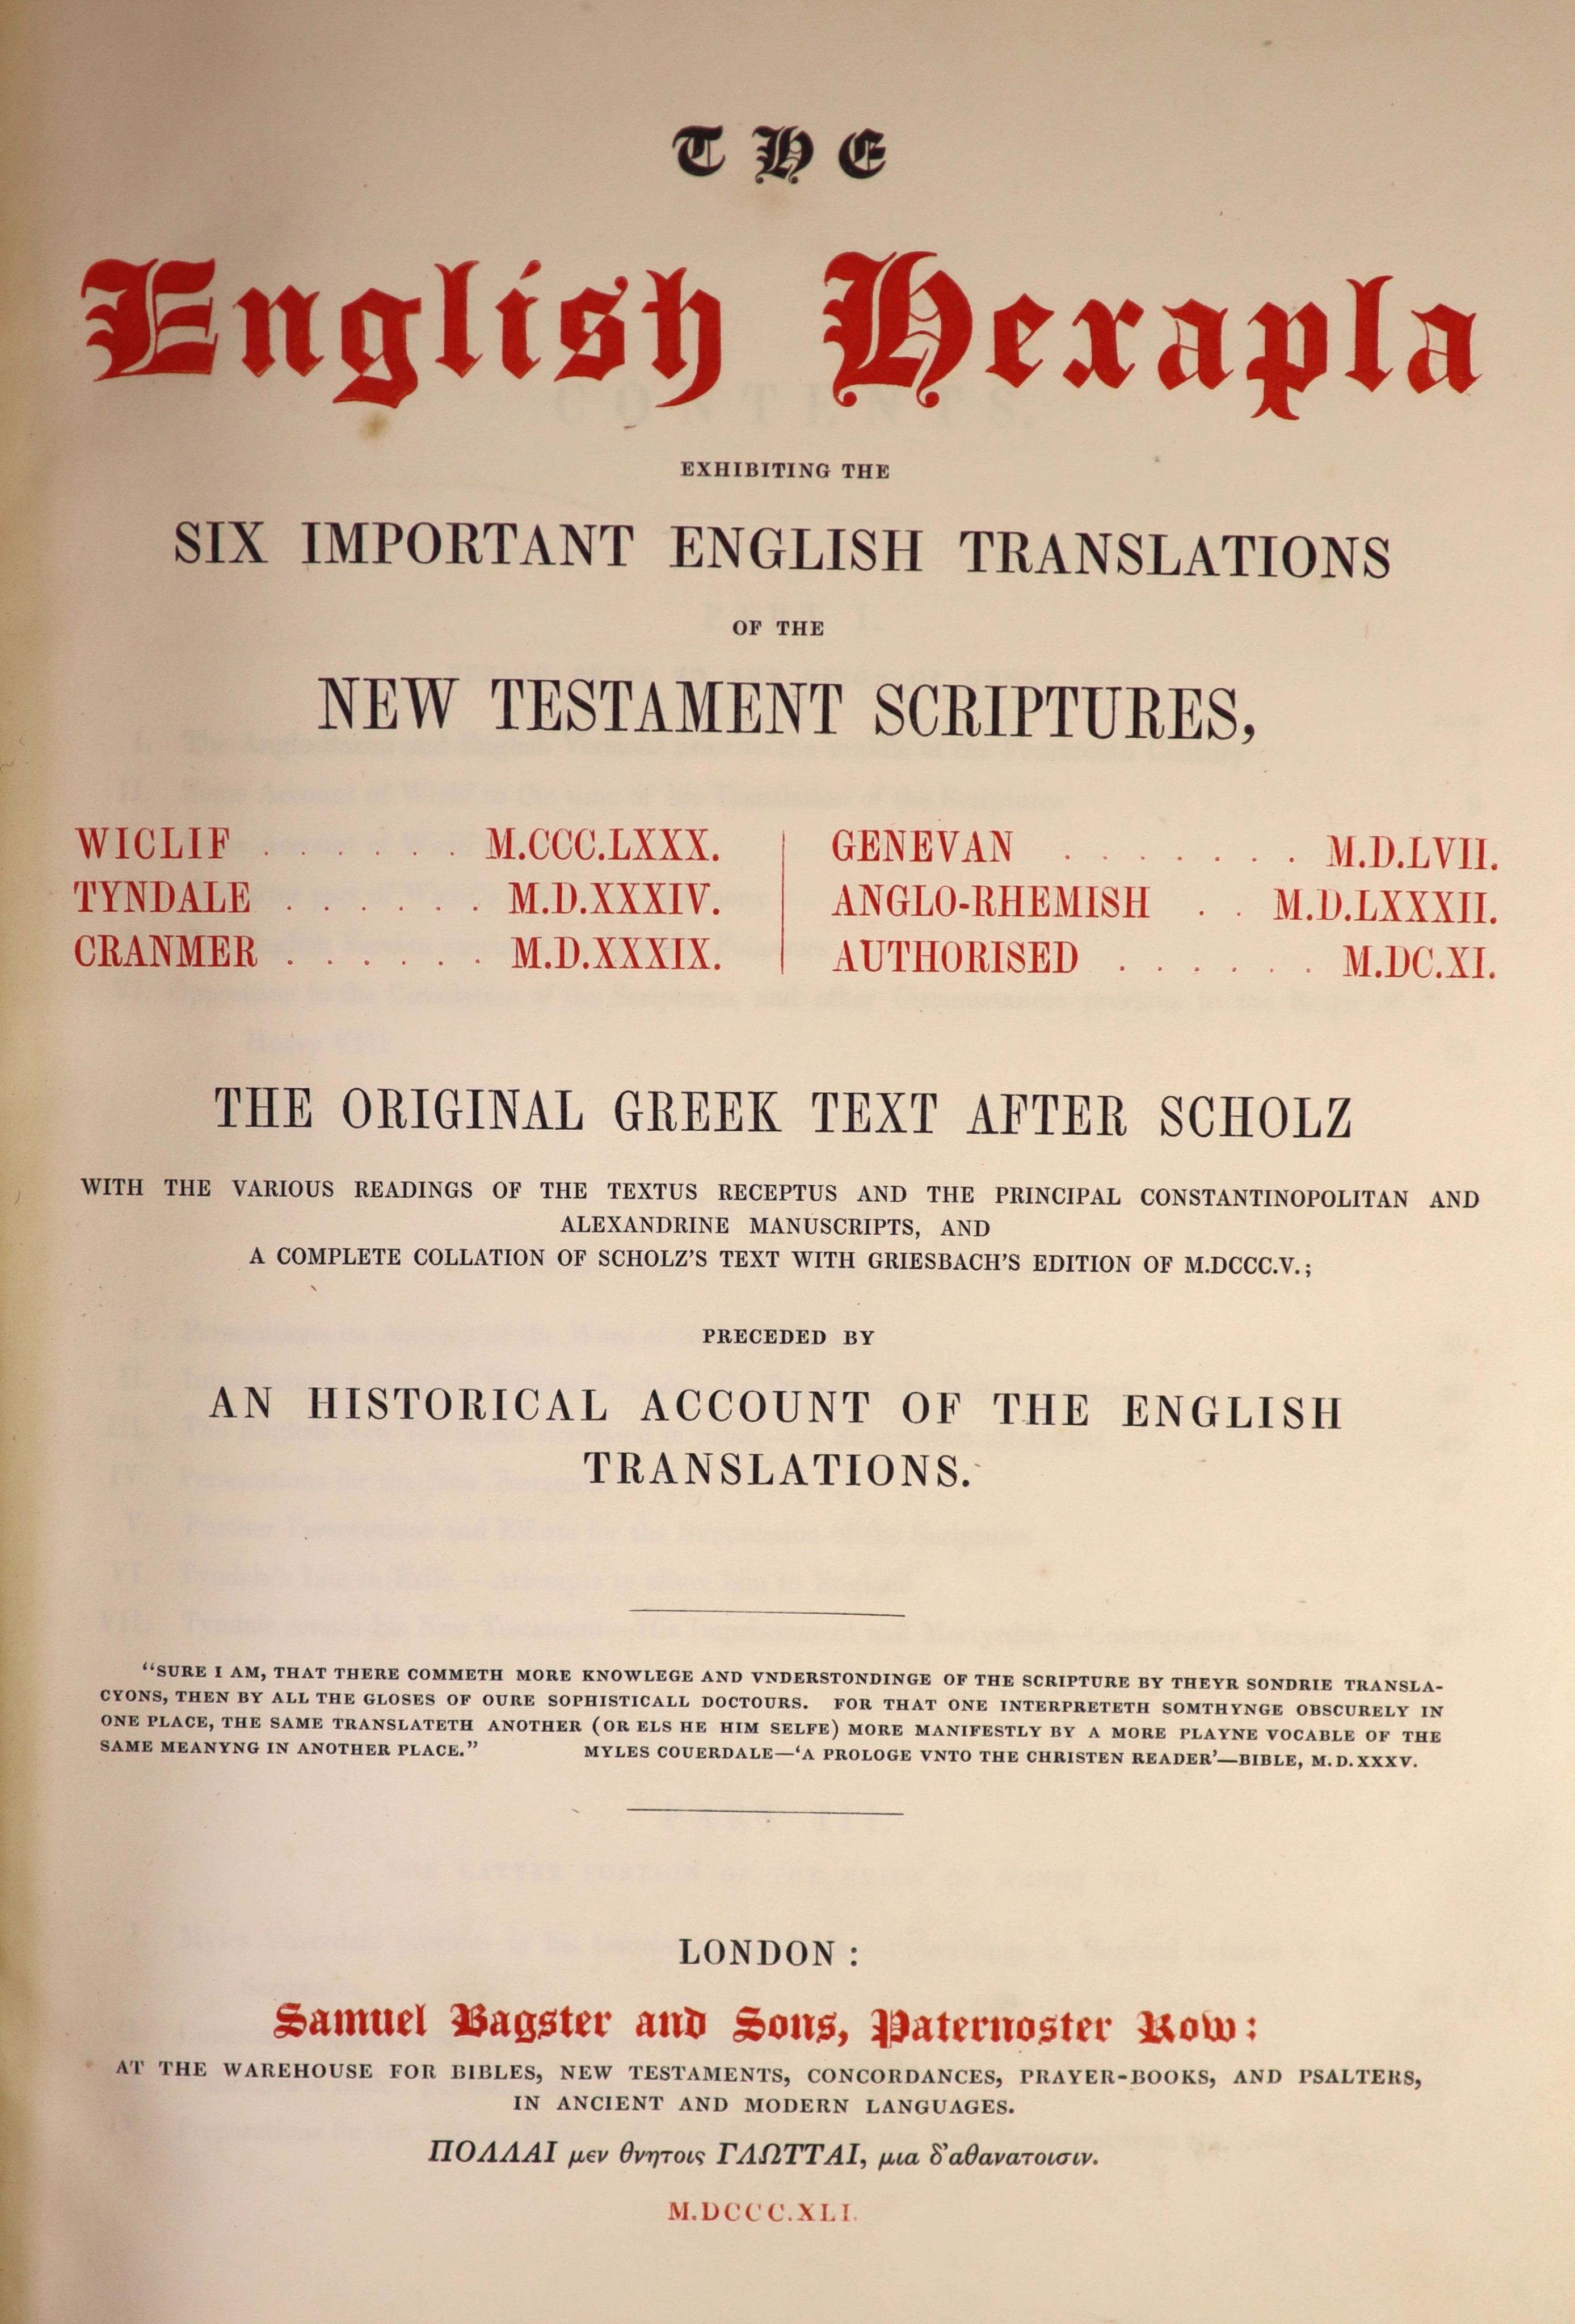 The English Hexapla: exhibiting the six important English translations of the New Testament Scriptures ... preceded by an historial account .. publisher's blind-decorated morocco